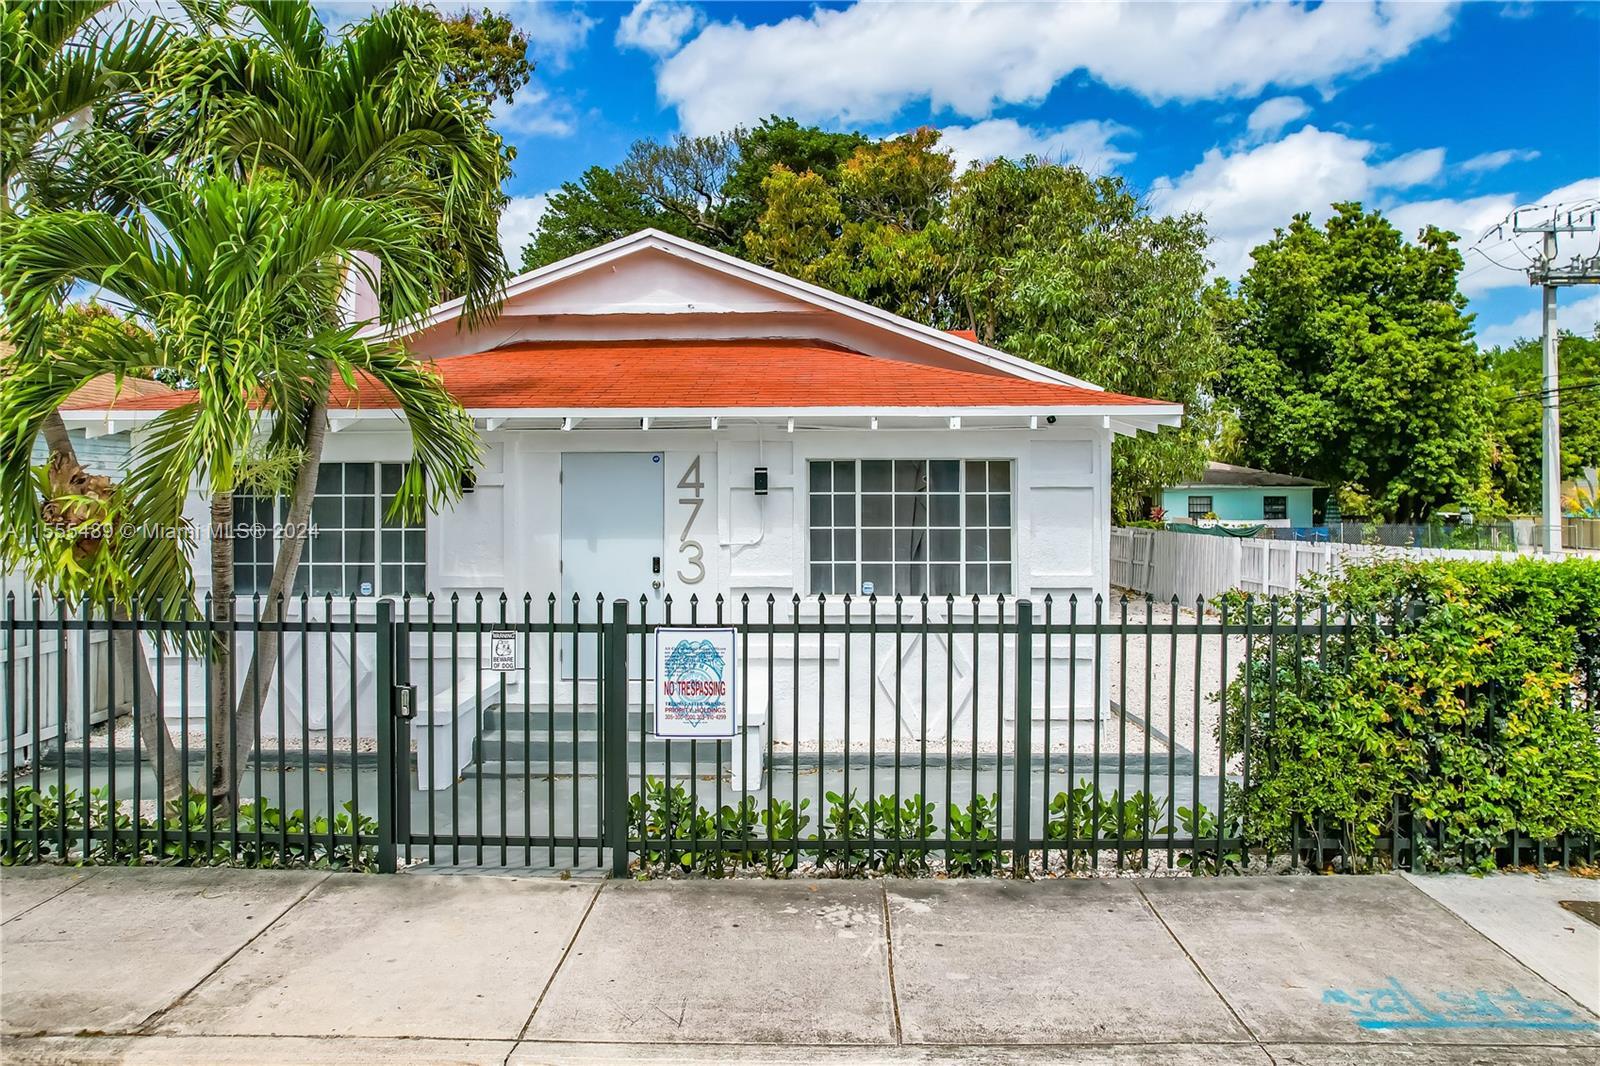 473 NE 61 ST: This 5-bedroom, 2-bathroom property boasts 1,436 sq.ft. of living space on a sizable 4